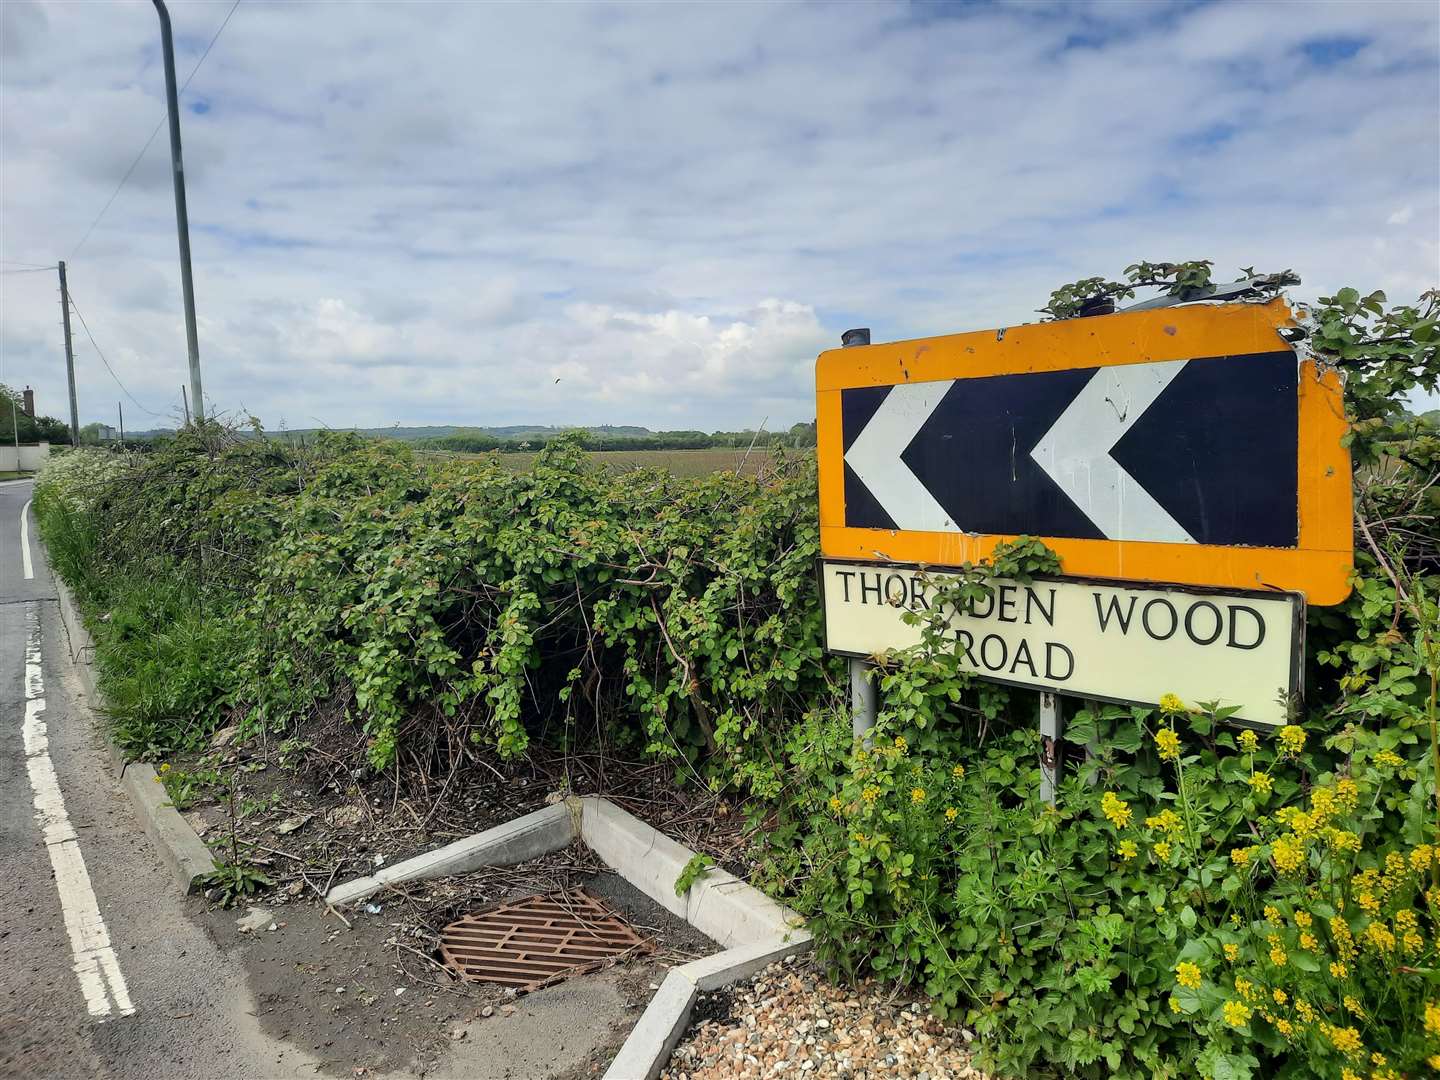 Thornden Wood Road in Herne Bay has been closed today